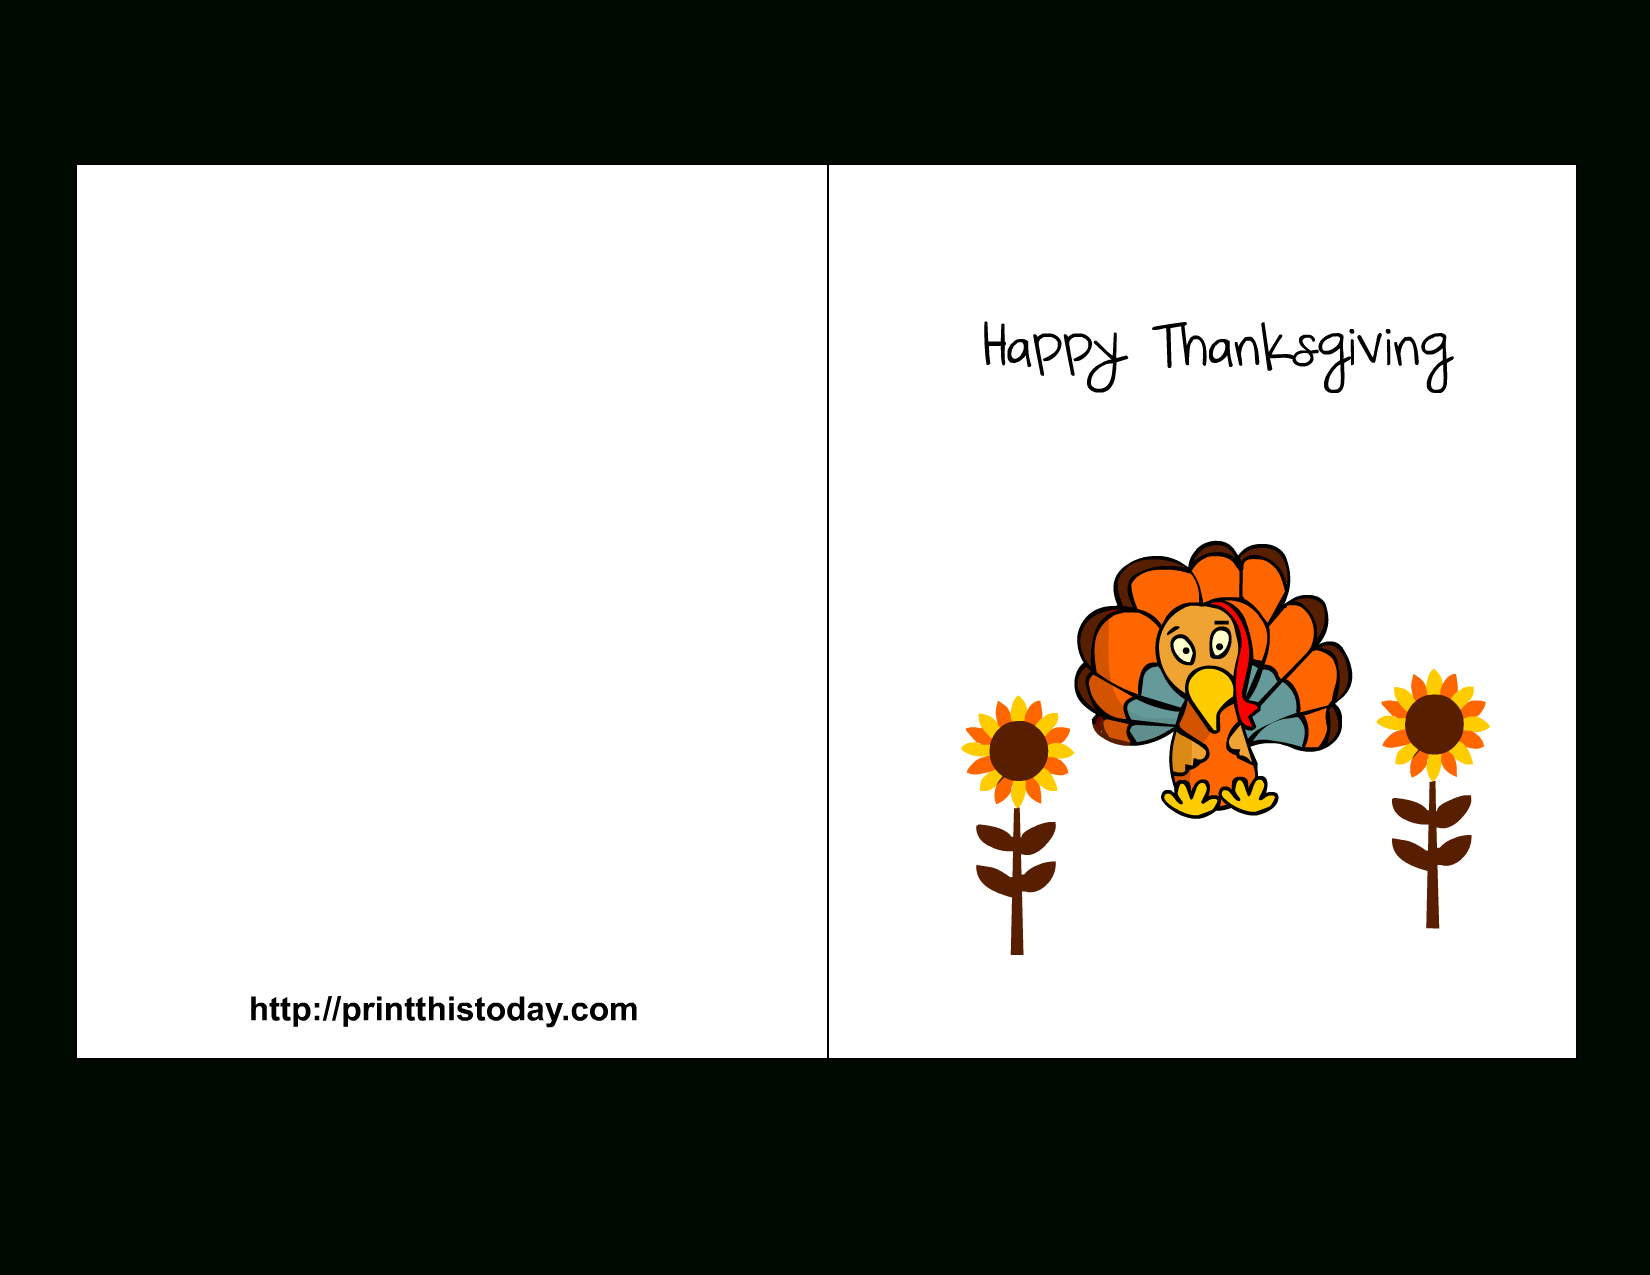 Printable Thanksgiving Cards - Printable Cards - Free Printable Thanksgiving Cards